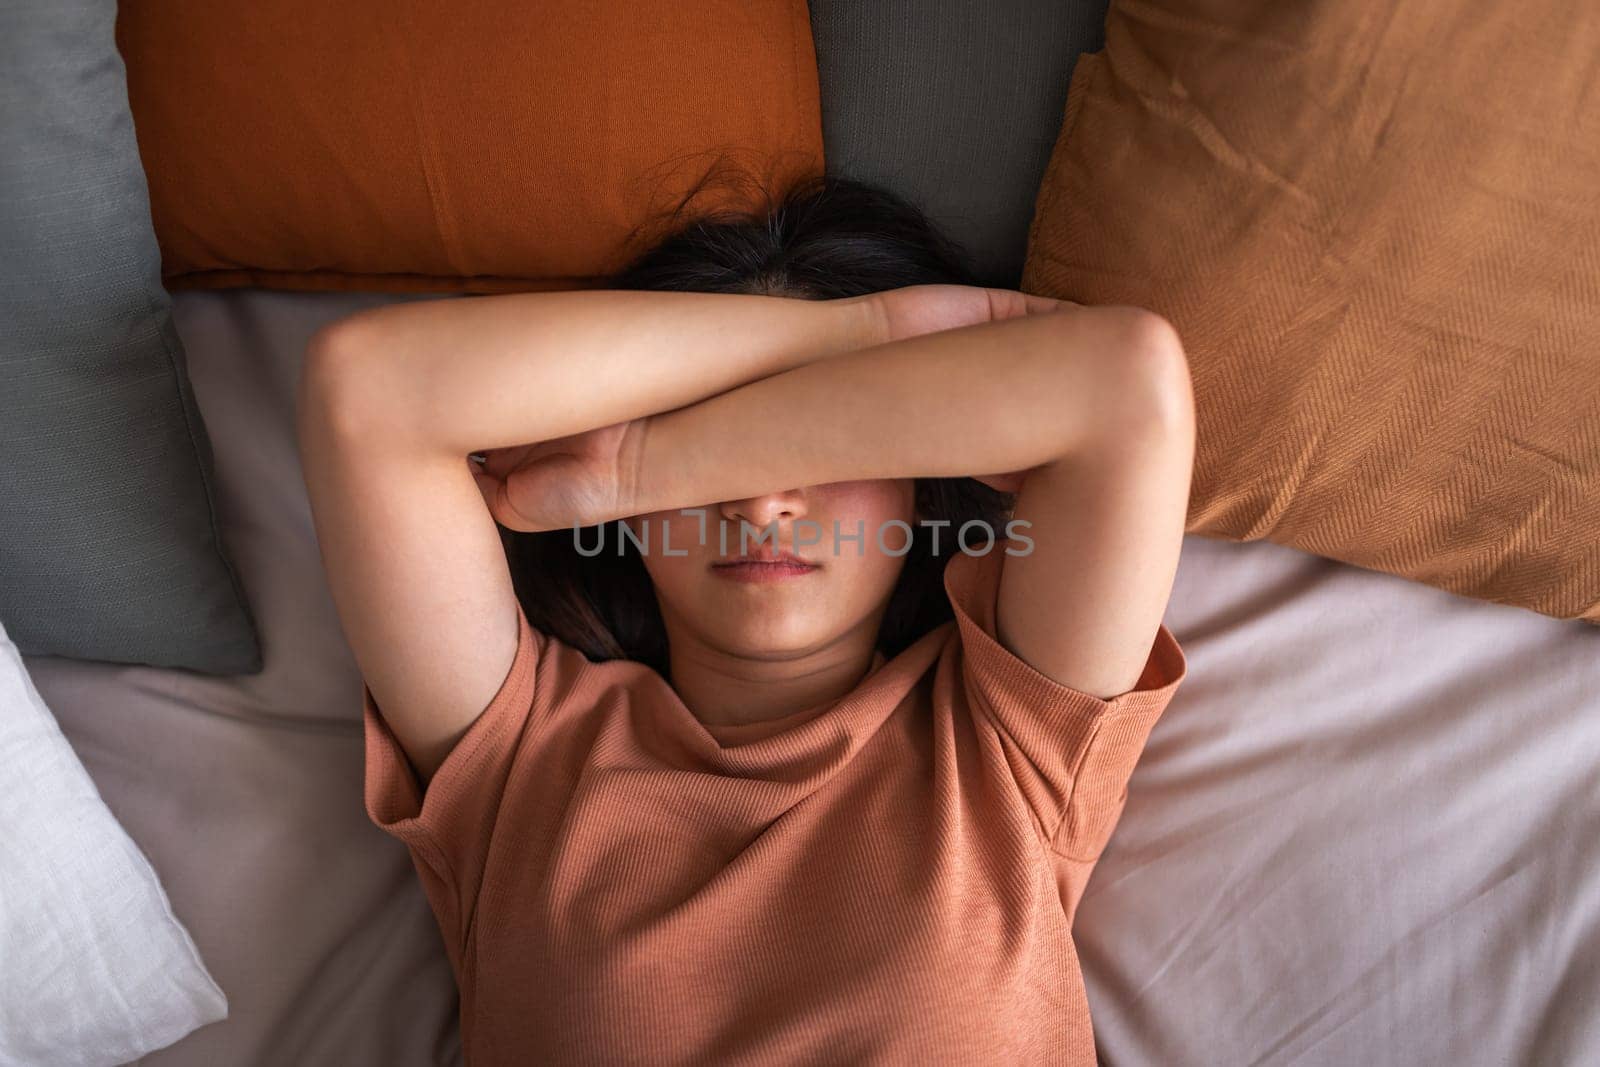 Top view of depressed, sad young asian woman lying on bed covering eyes with arms. Depression, mental health concepts.